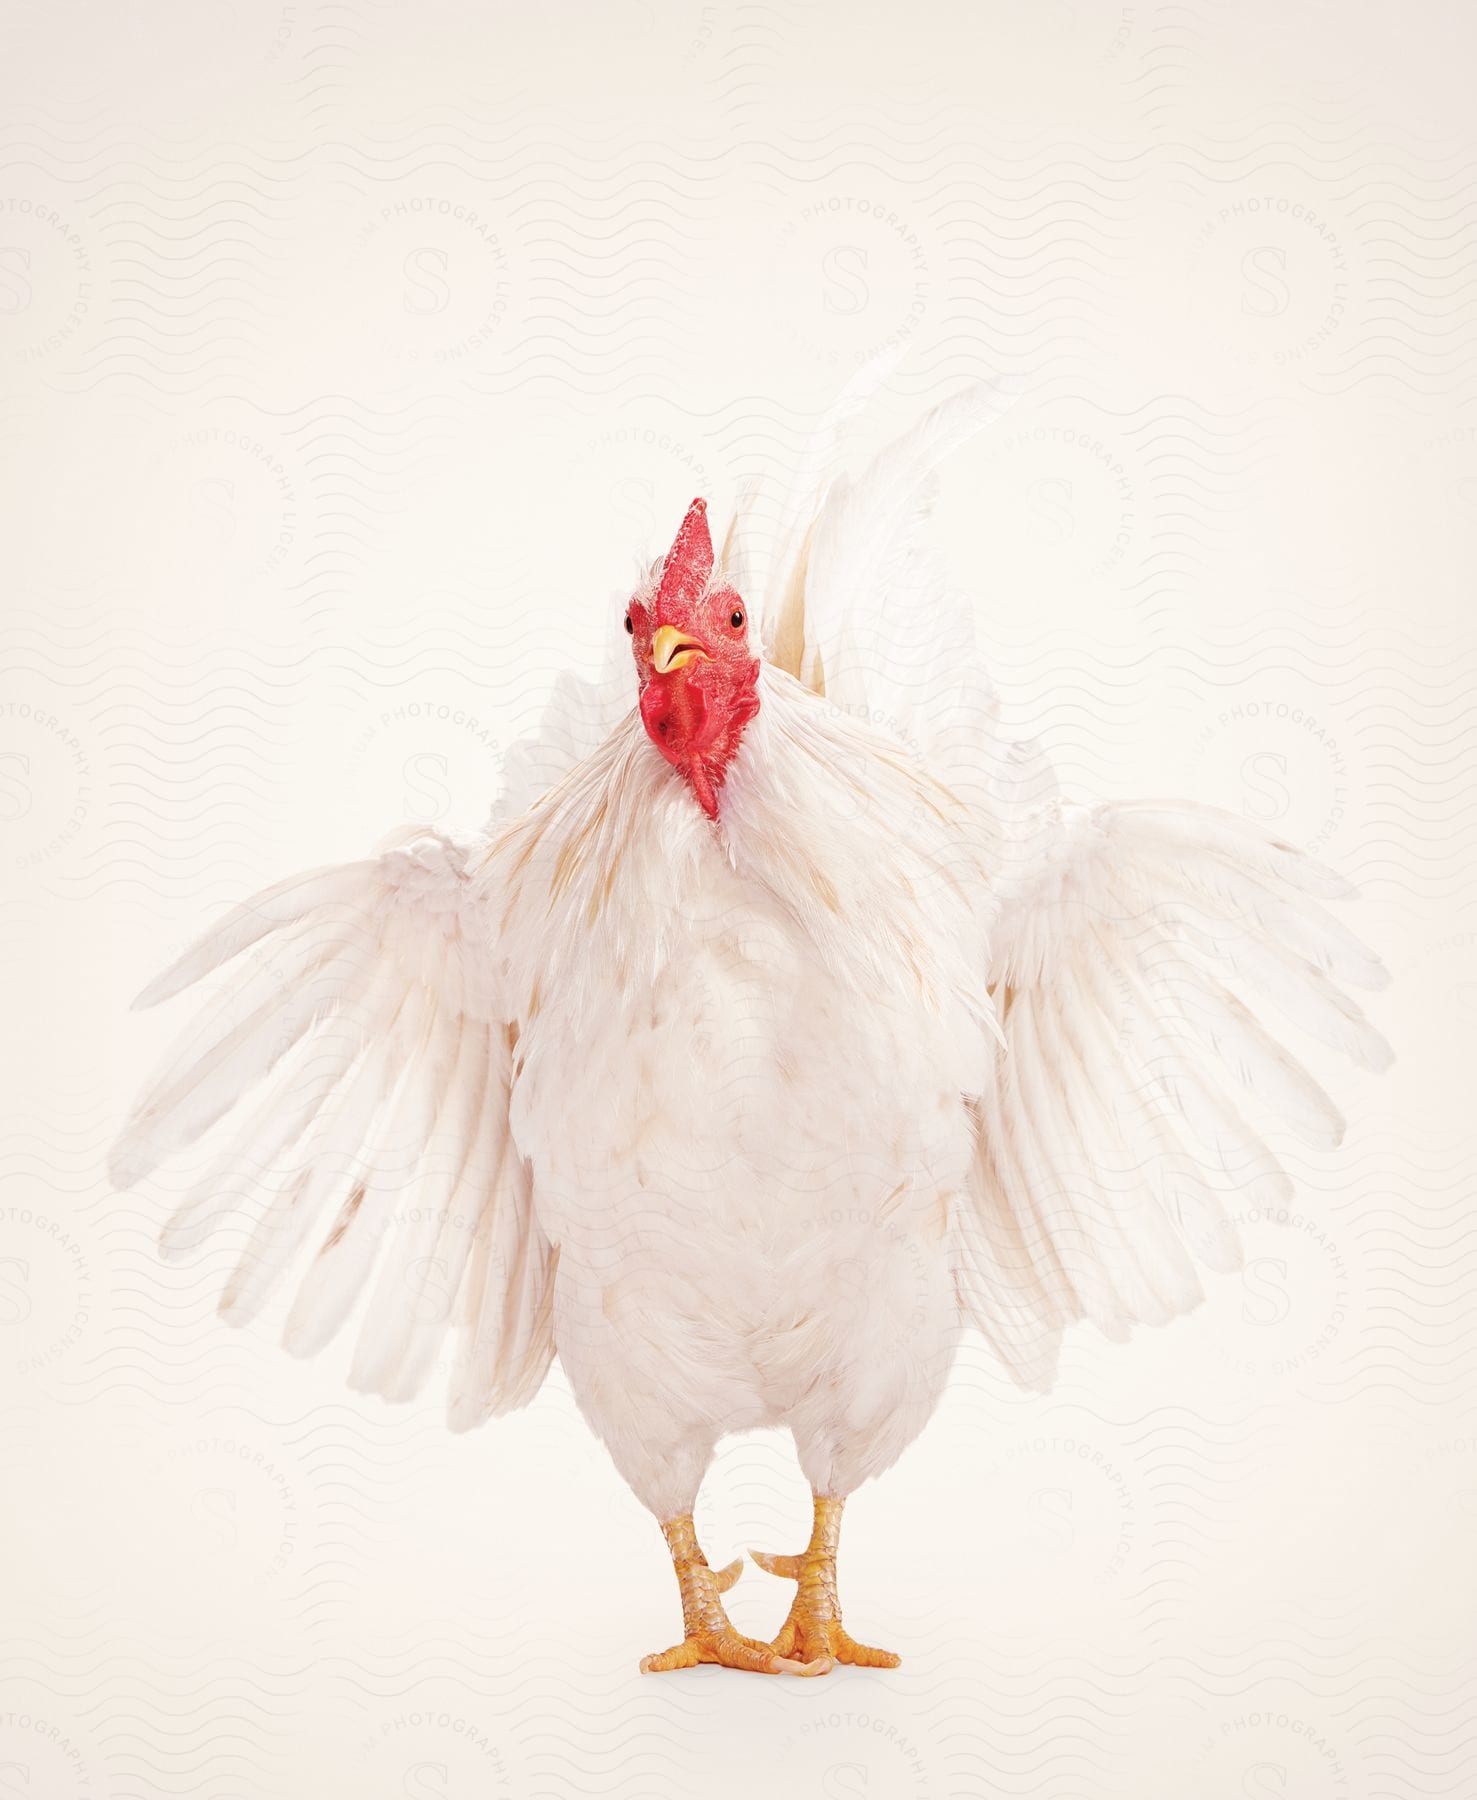 A chicken with its wings slightly spread facing forward